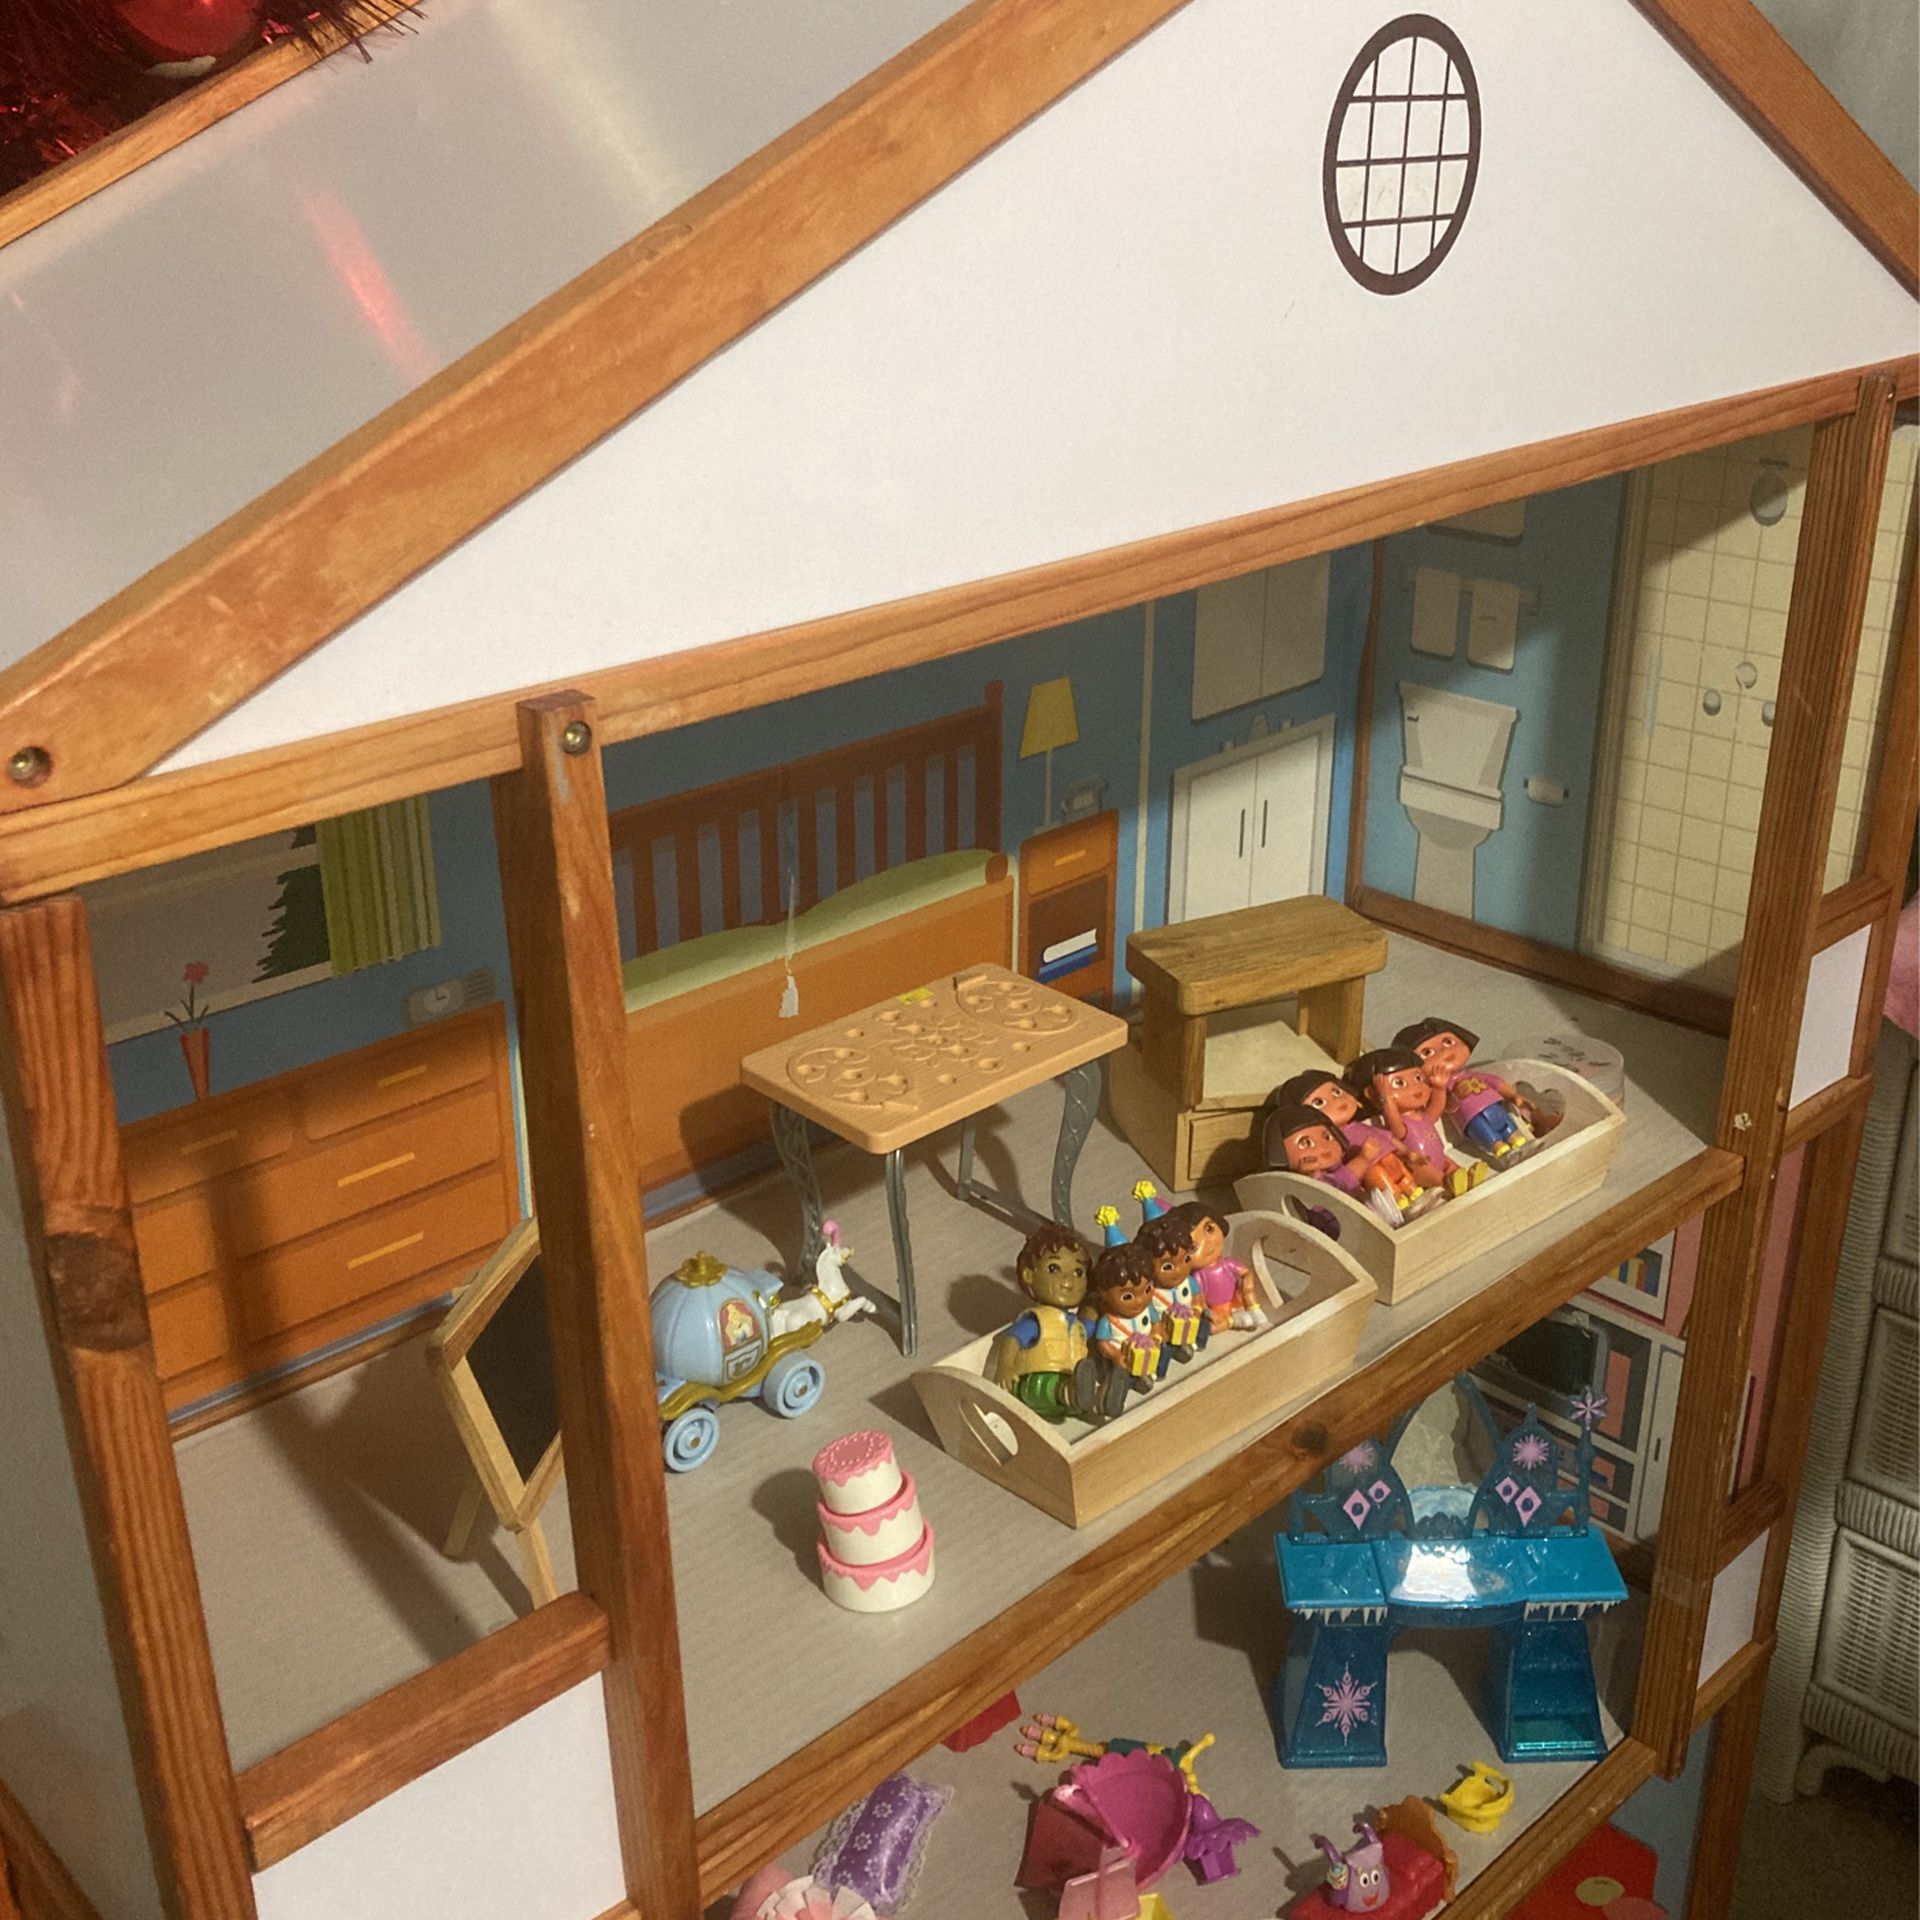 Doll house, playhouse extra large 5 foot tall many extras included